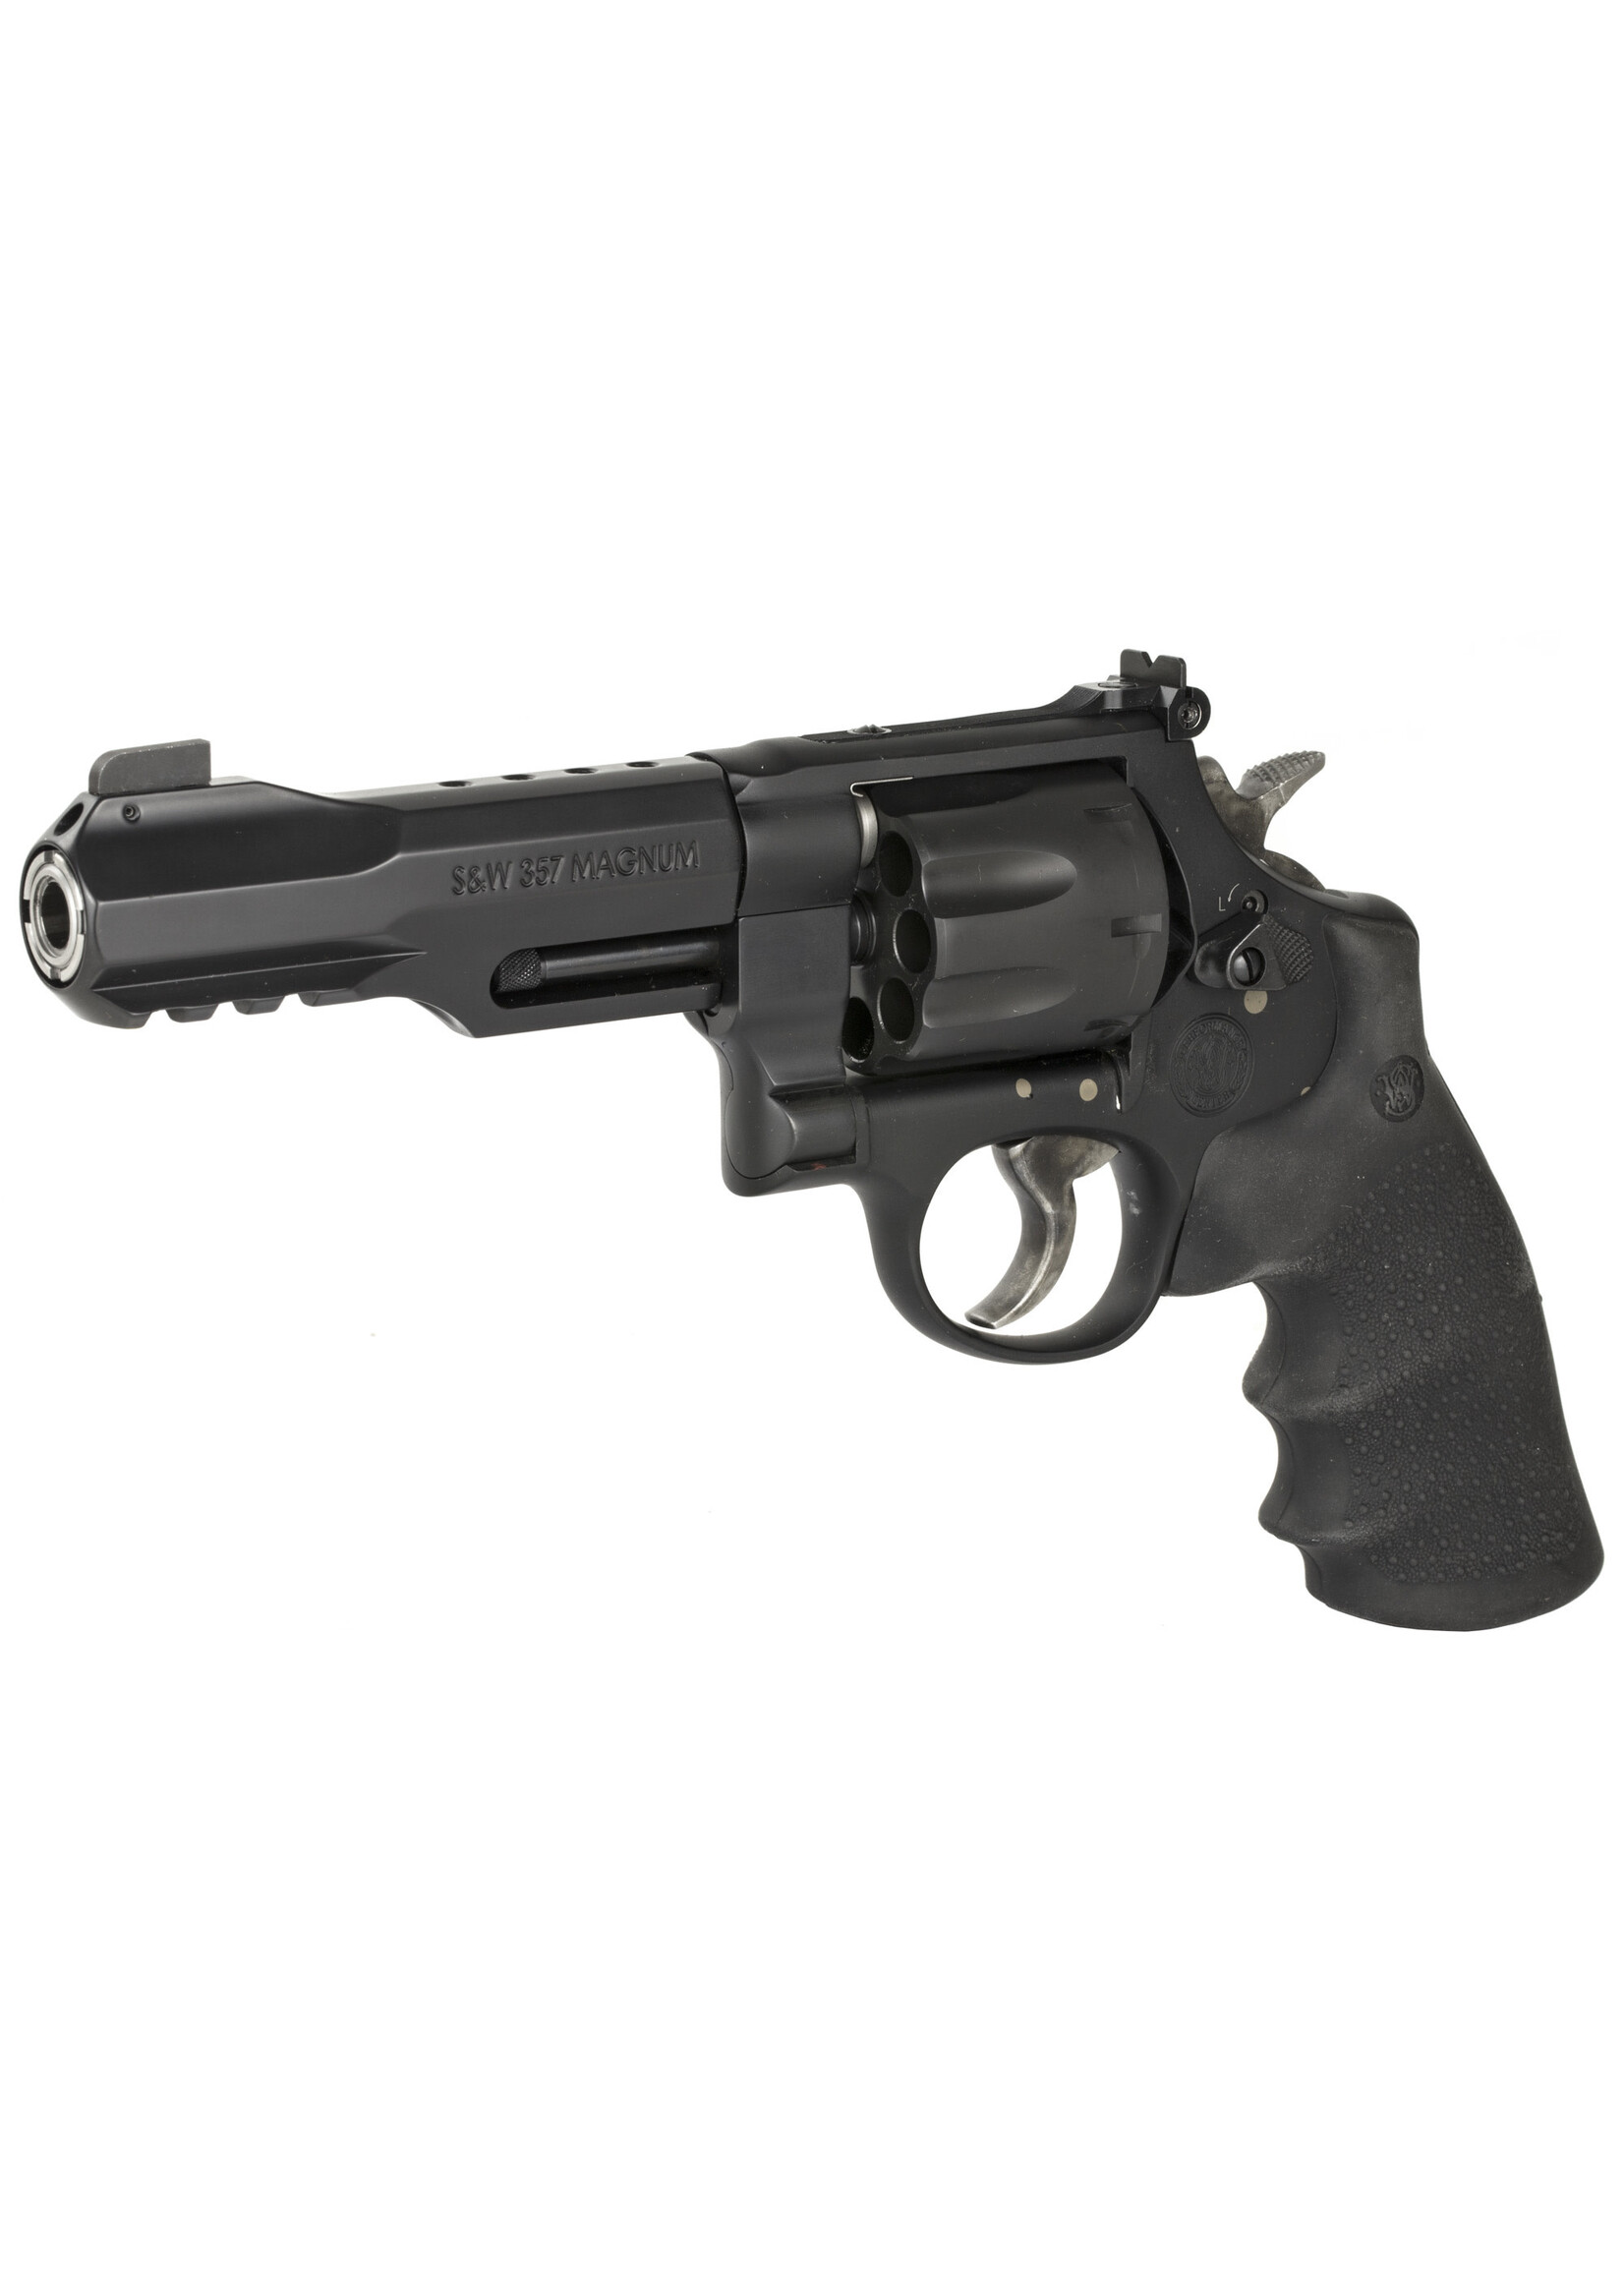 SMITH & WESSON SMITH & WESSON PERFORMANCE CENTER MODEL M&P R8 .357M 8RD 5"